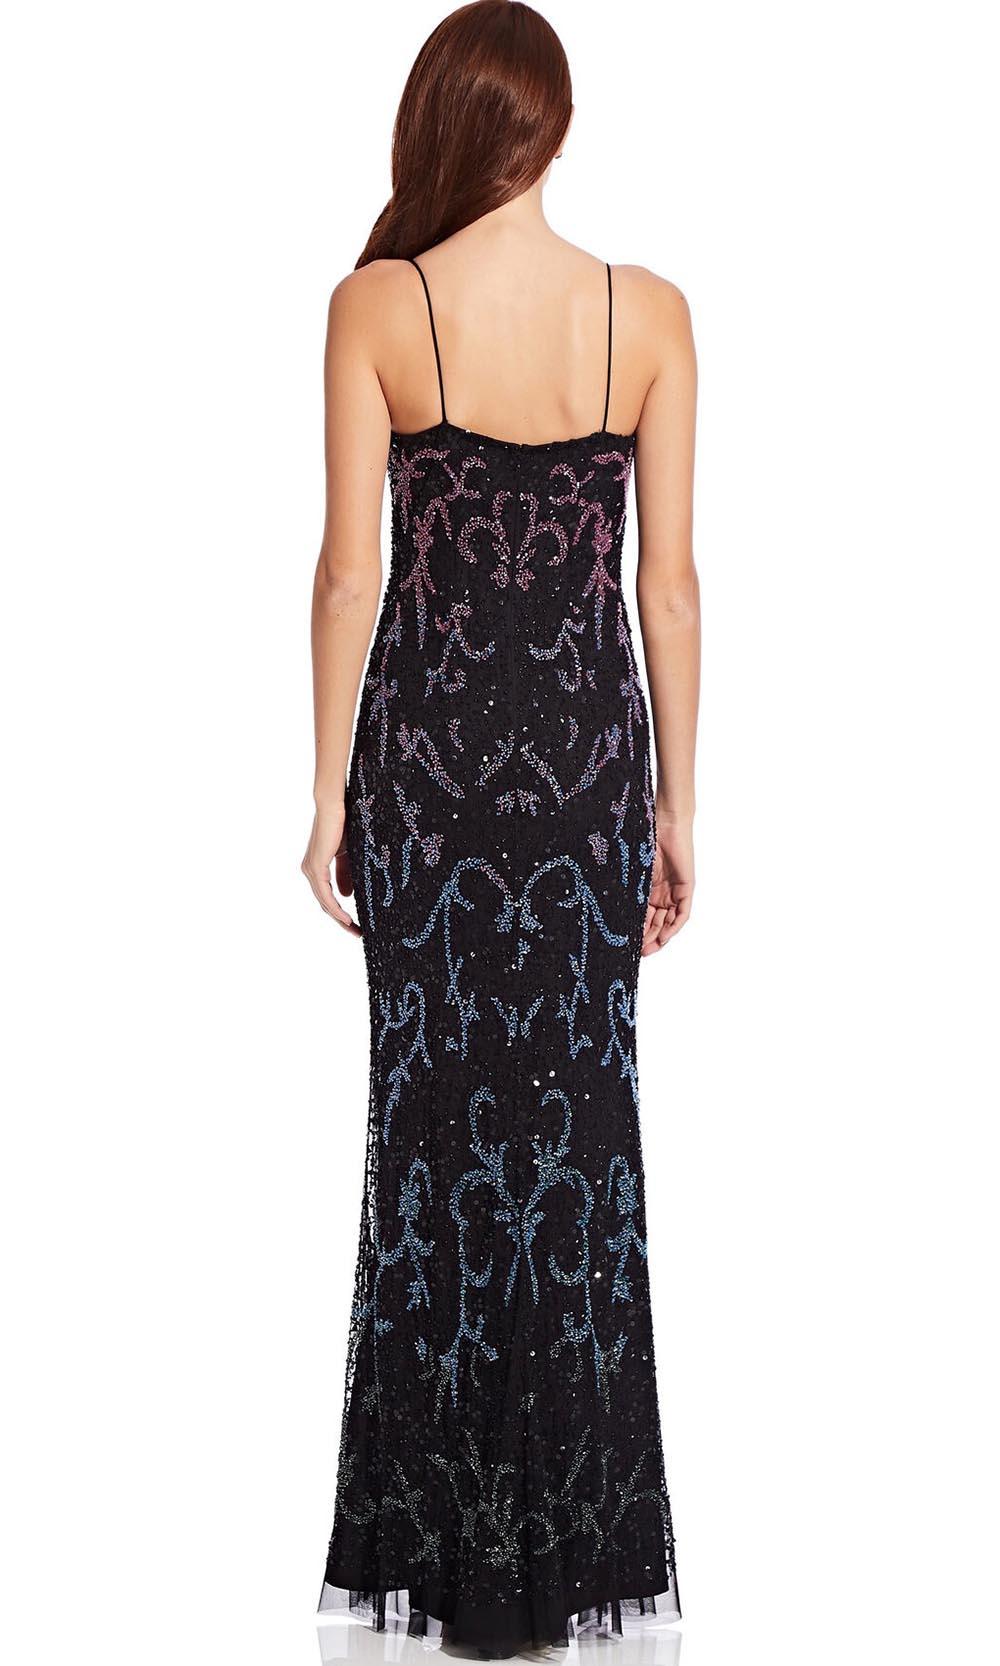 Adrianna Papell Formal Beaded Long Dress AP1E206840 - The Dress Outlet